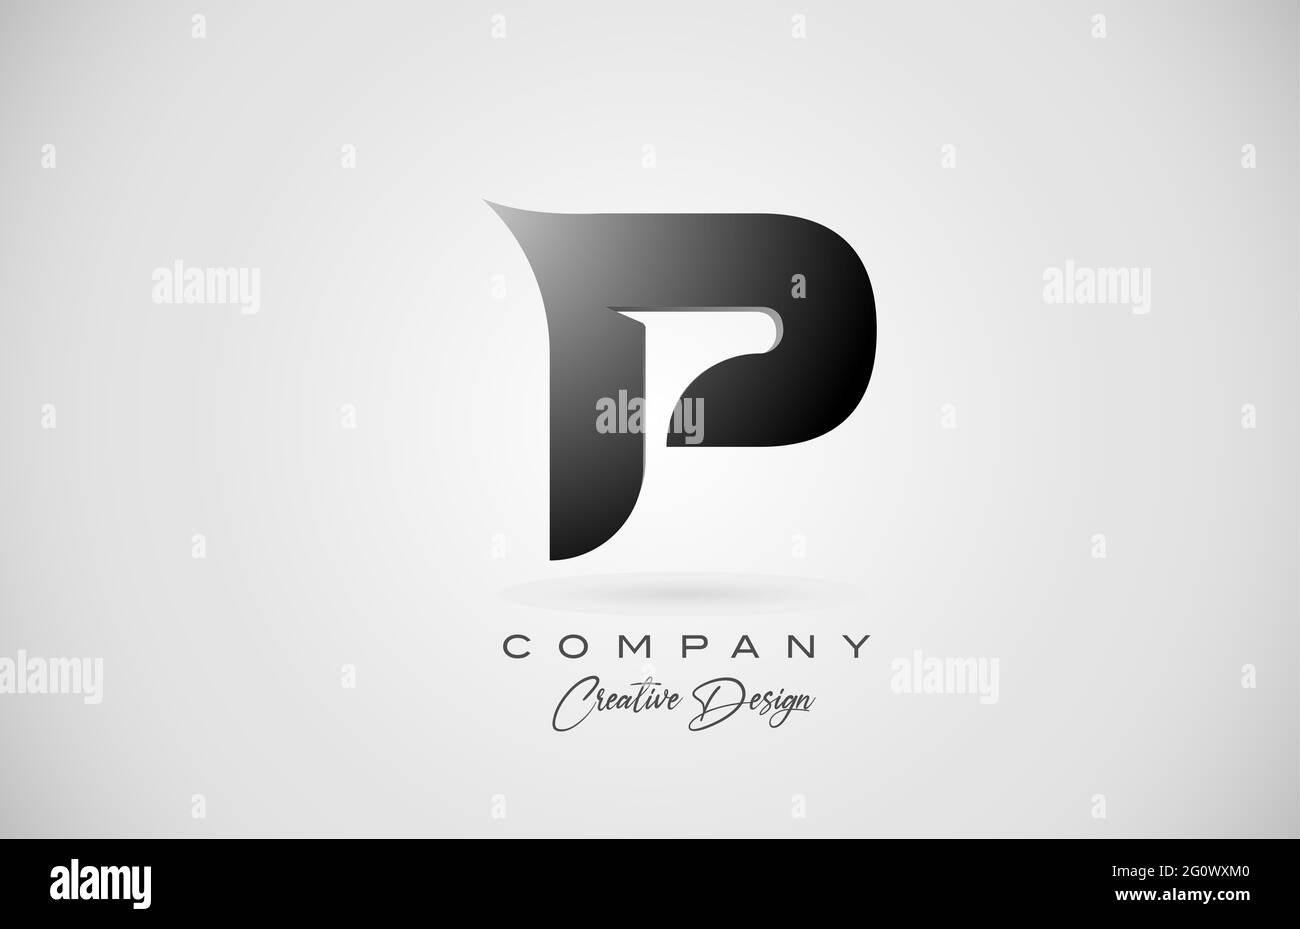 Initial PM Letter Logo Design Free Download – GraphicsFamily